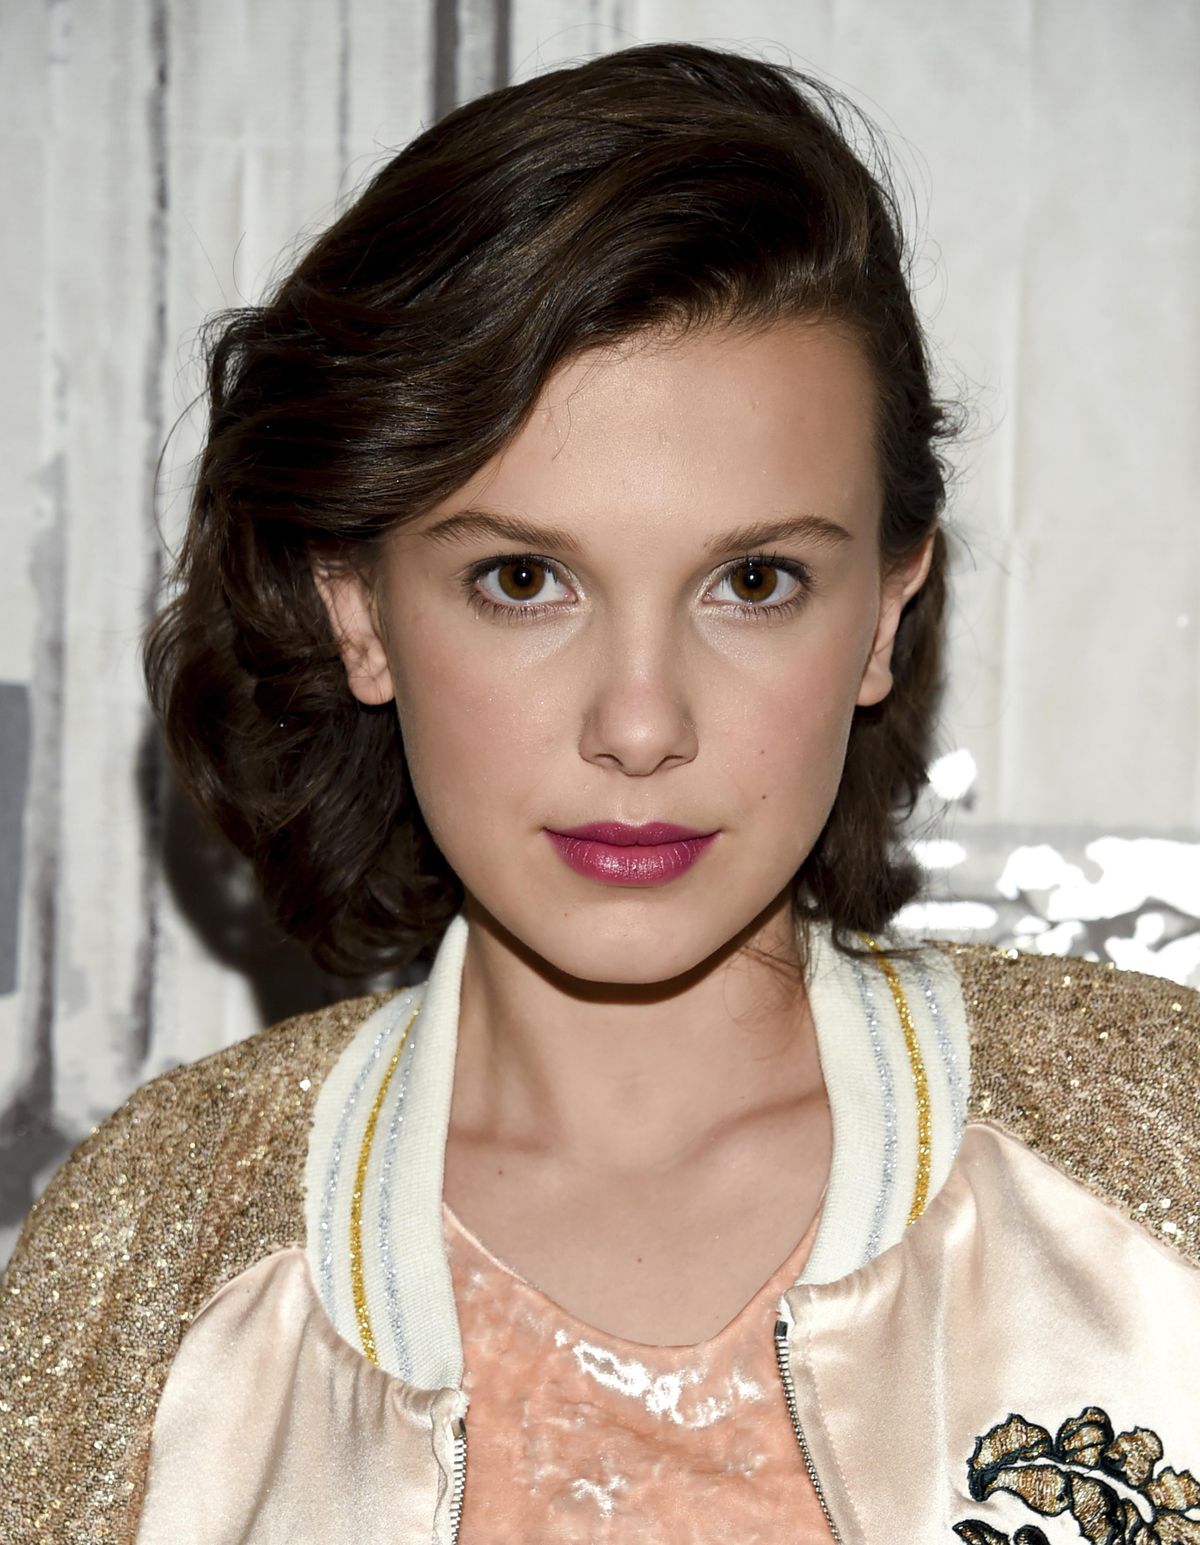 Actress Millie Bobby Brown participates in the BUILD Speaker Series to discuss the Netflix television series “Stranger Things” at AOL Studios on Tuesday, Oct. 31, 2017, in New York. (Evan Agostini / Invision/AP)